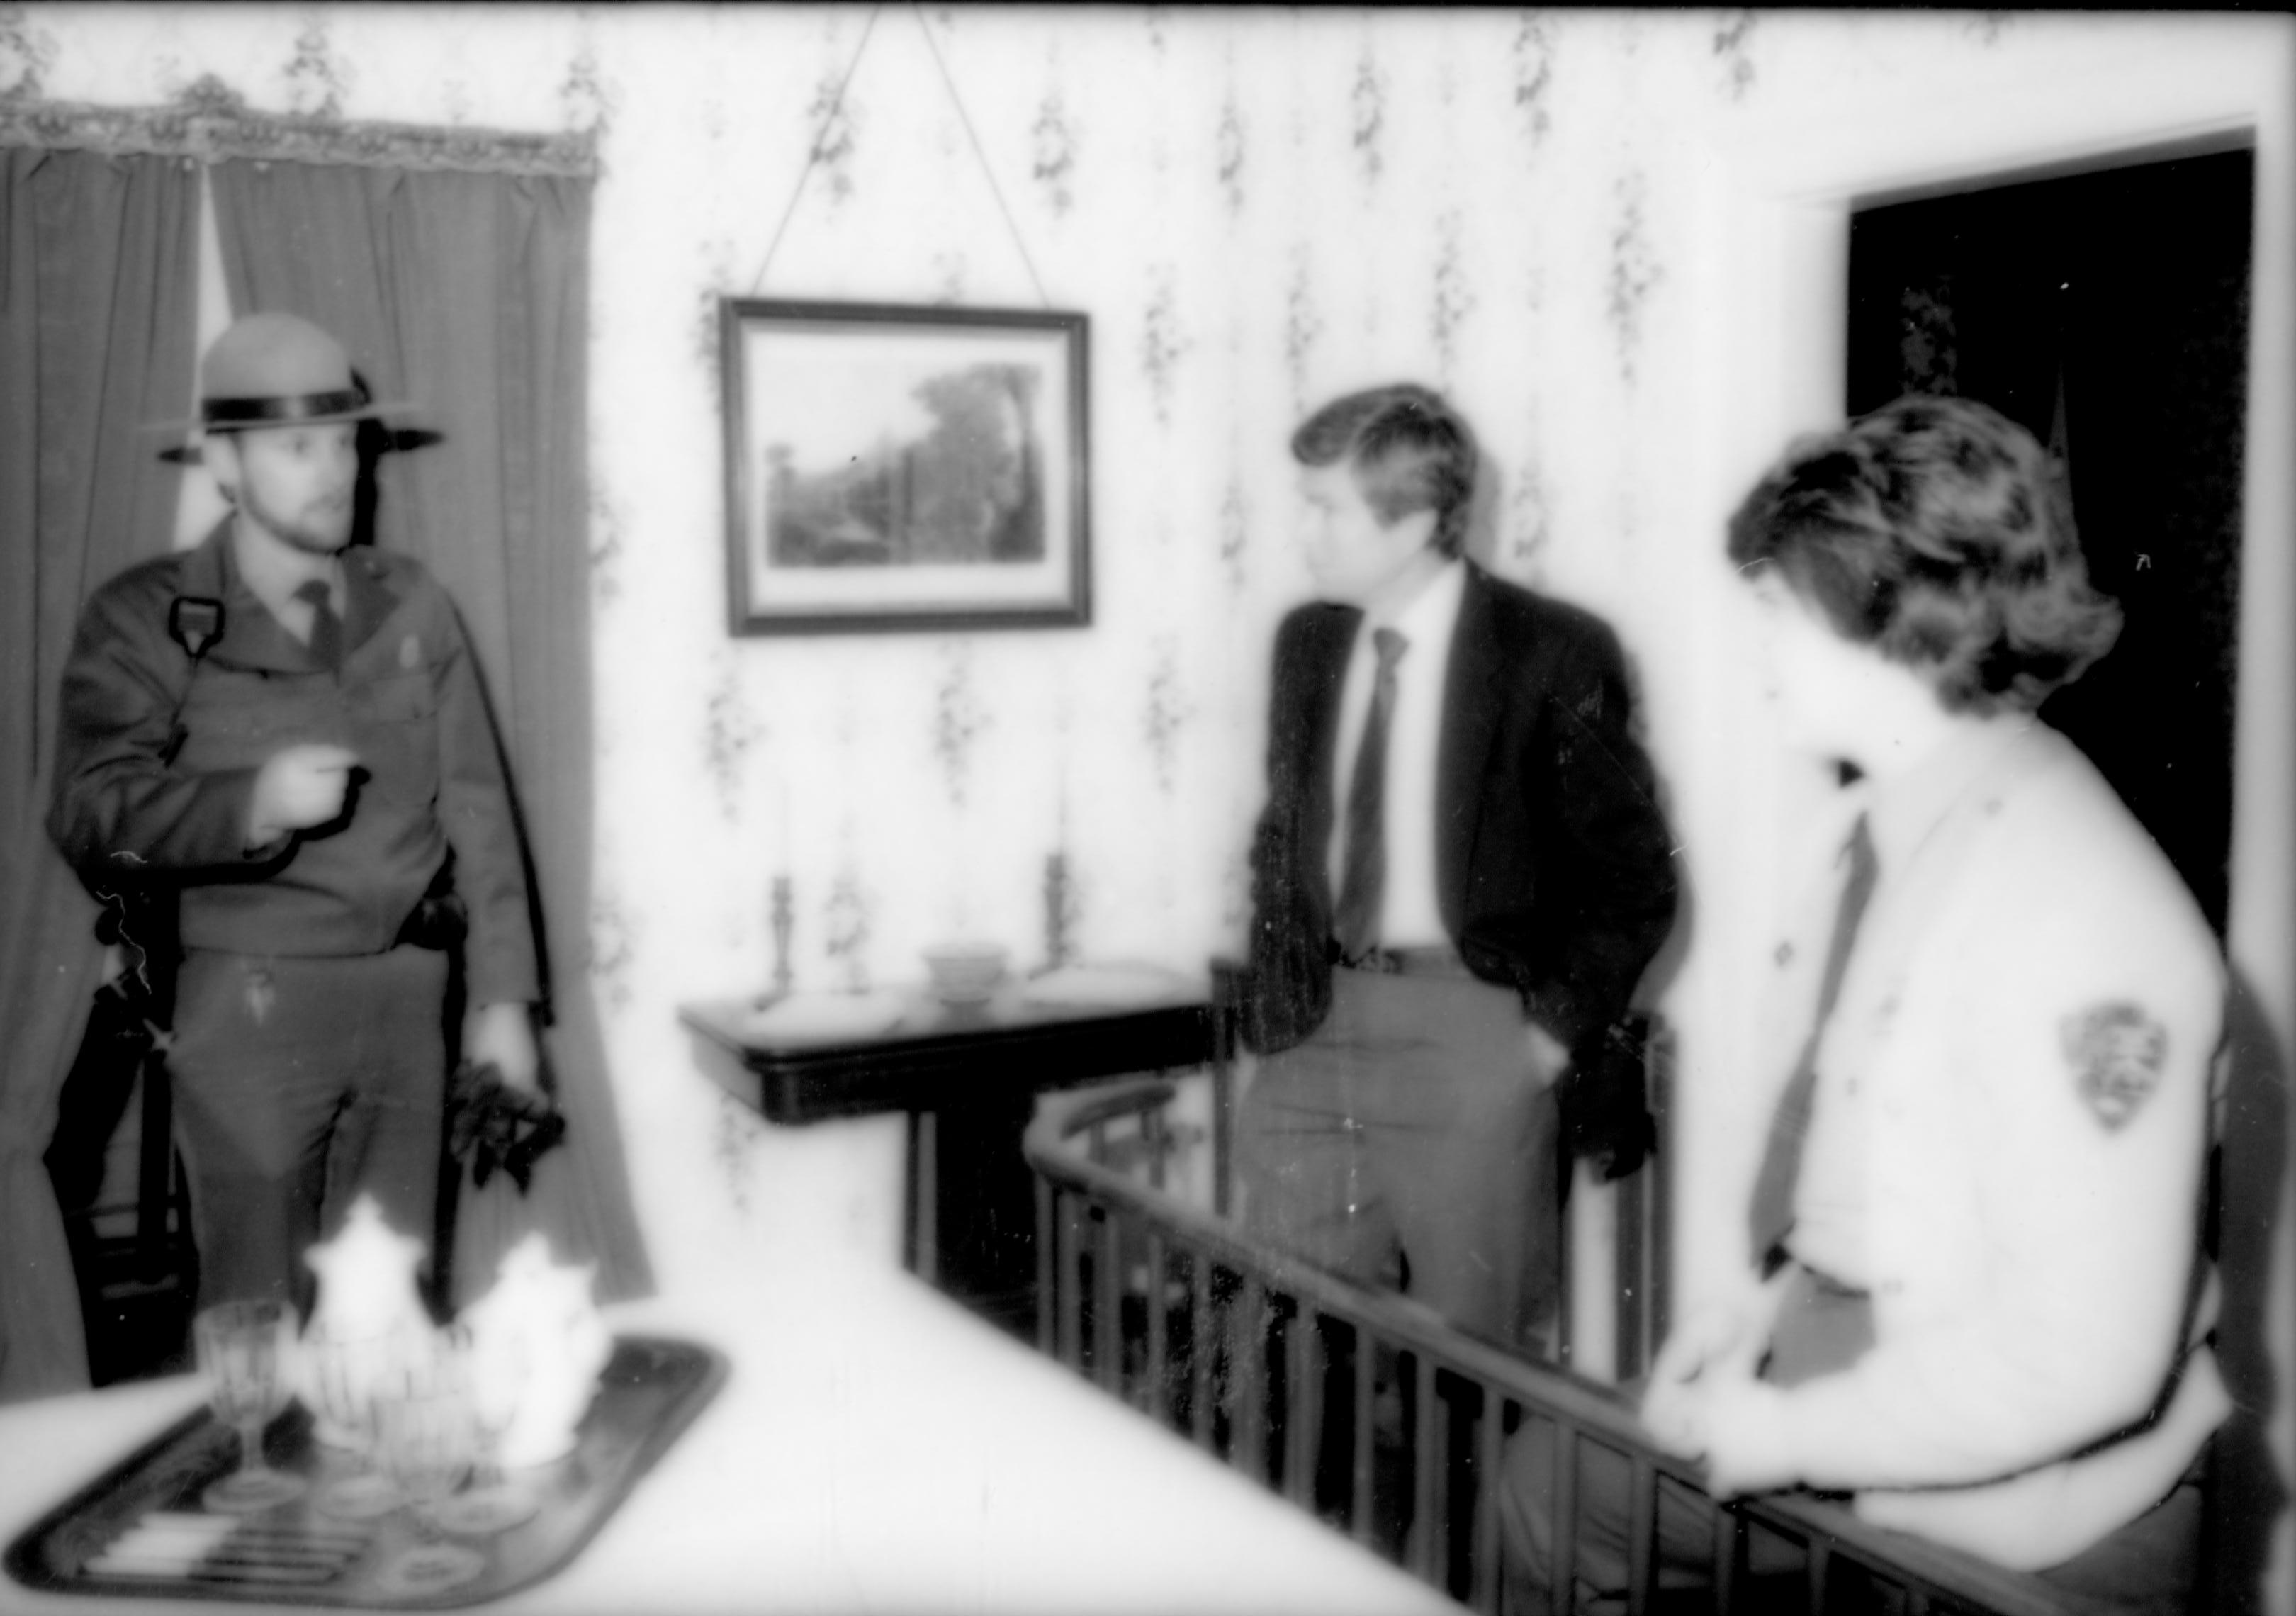 Two Rangers with James McPearson in dining room. Lincoln Home NHS- Today Show McPearson, 76431 Today Show, Lincoln Home, tour